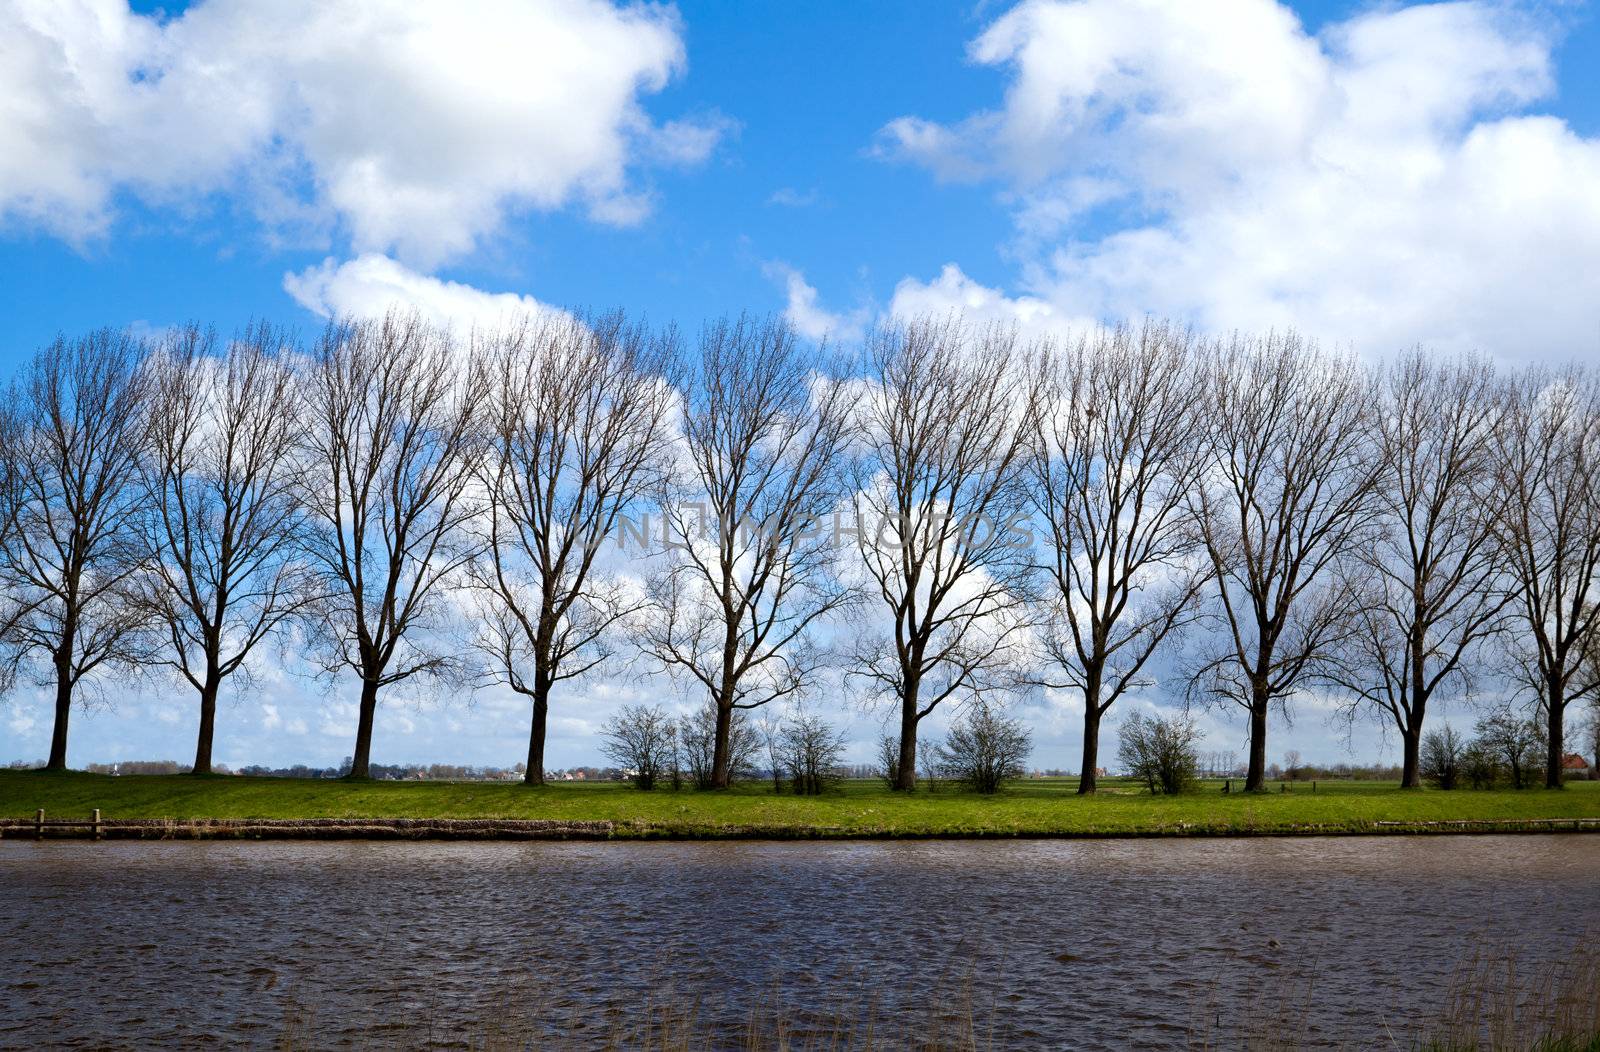 riverbank with trees on the horizon over blue sky